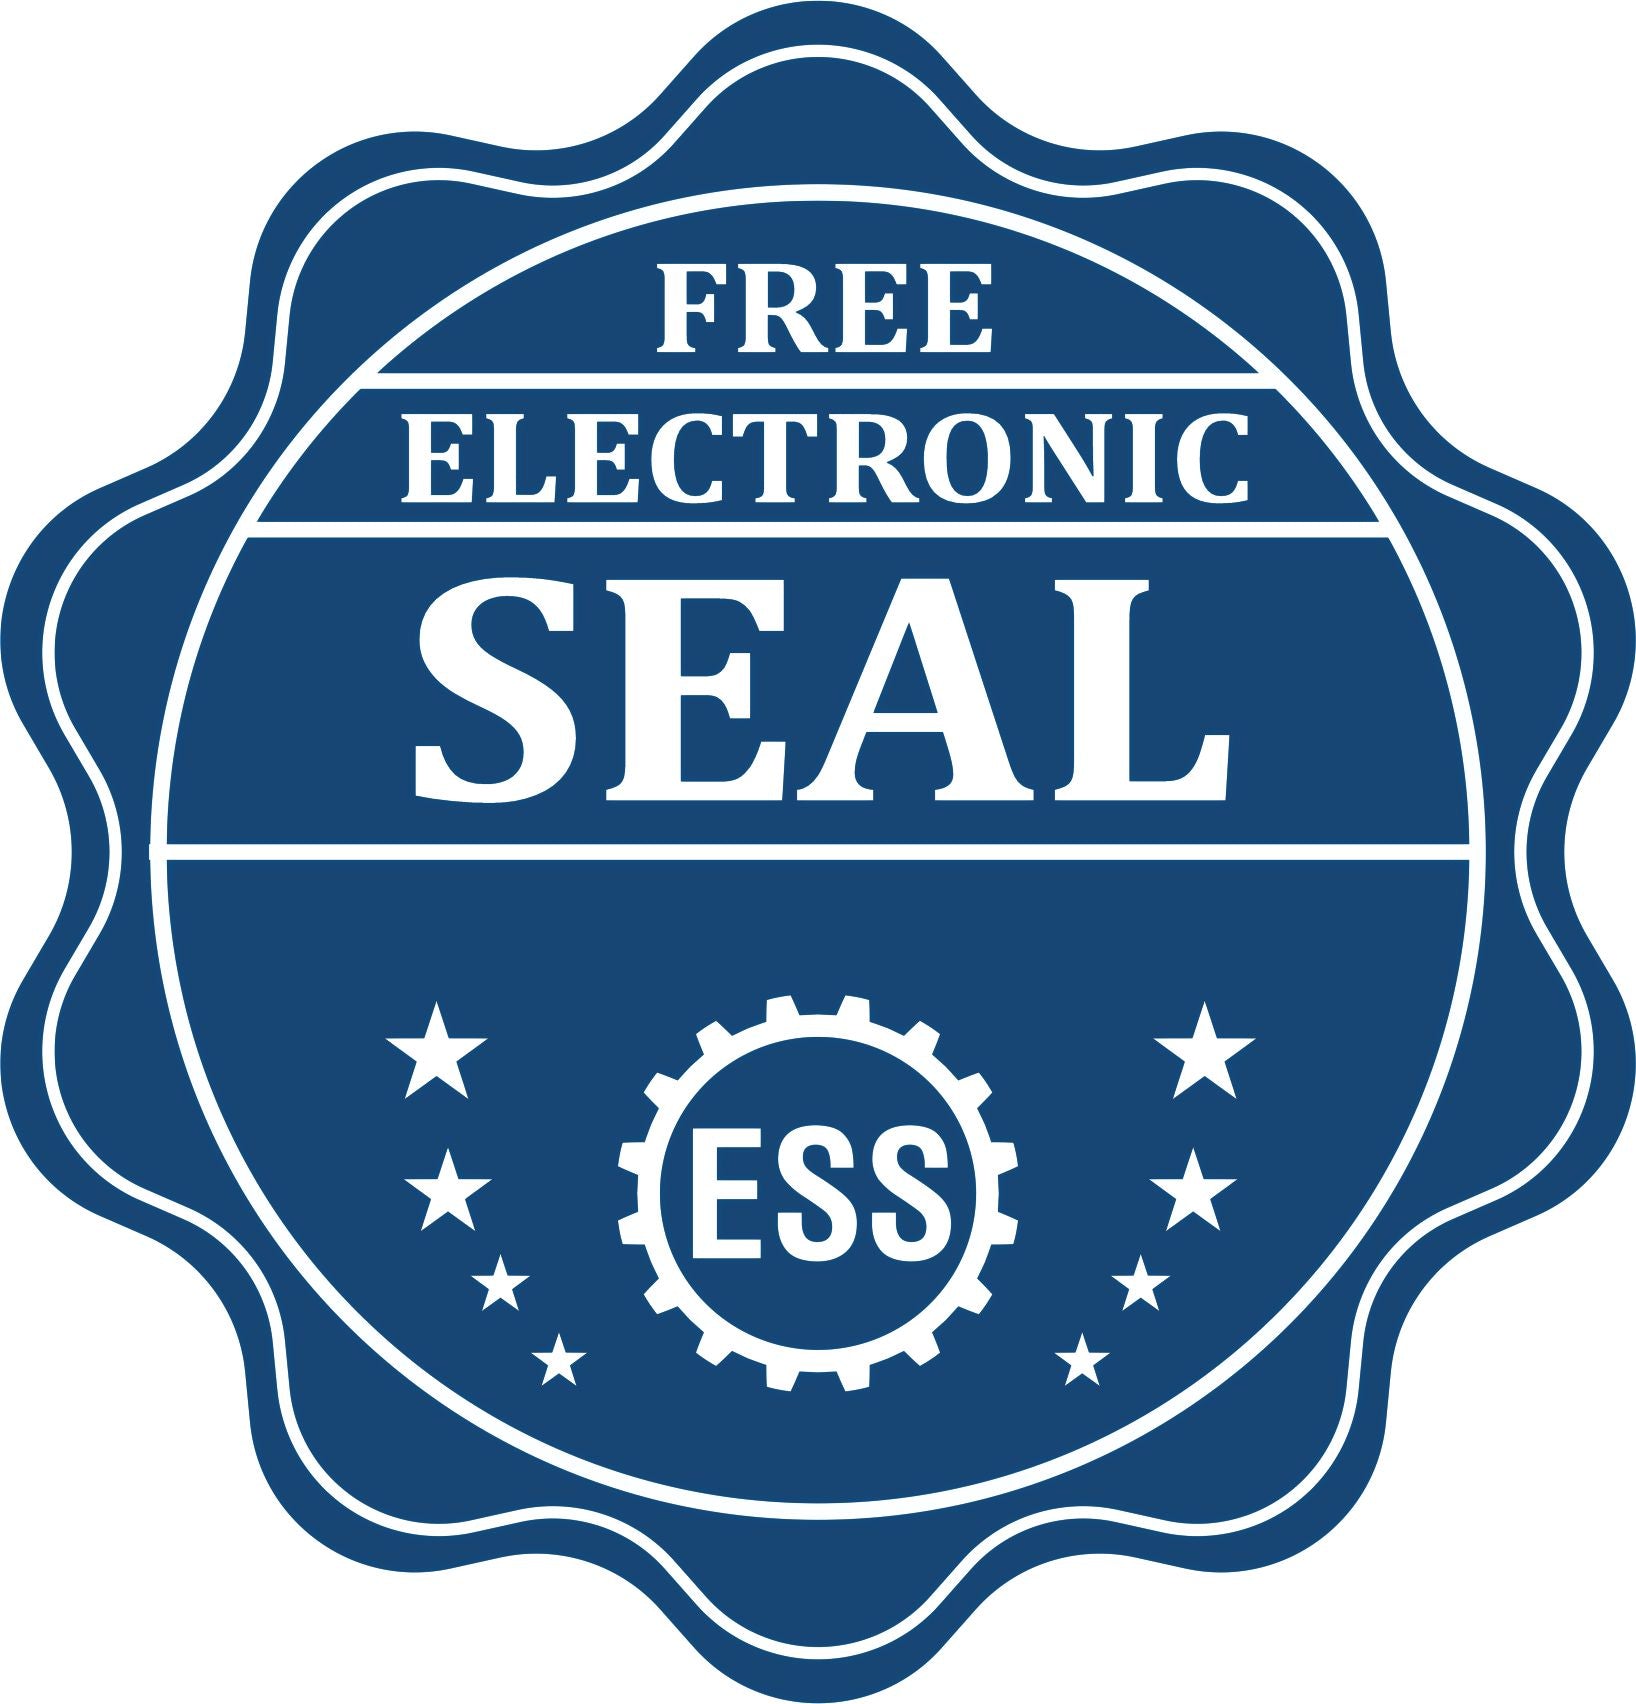 A badge showing a free electronic seal for the Self-Inking Iowa Landscape Architect Stamp with stars and the ESS gear on the emblem.